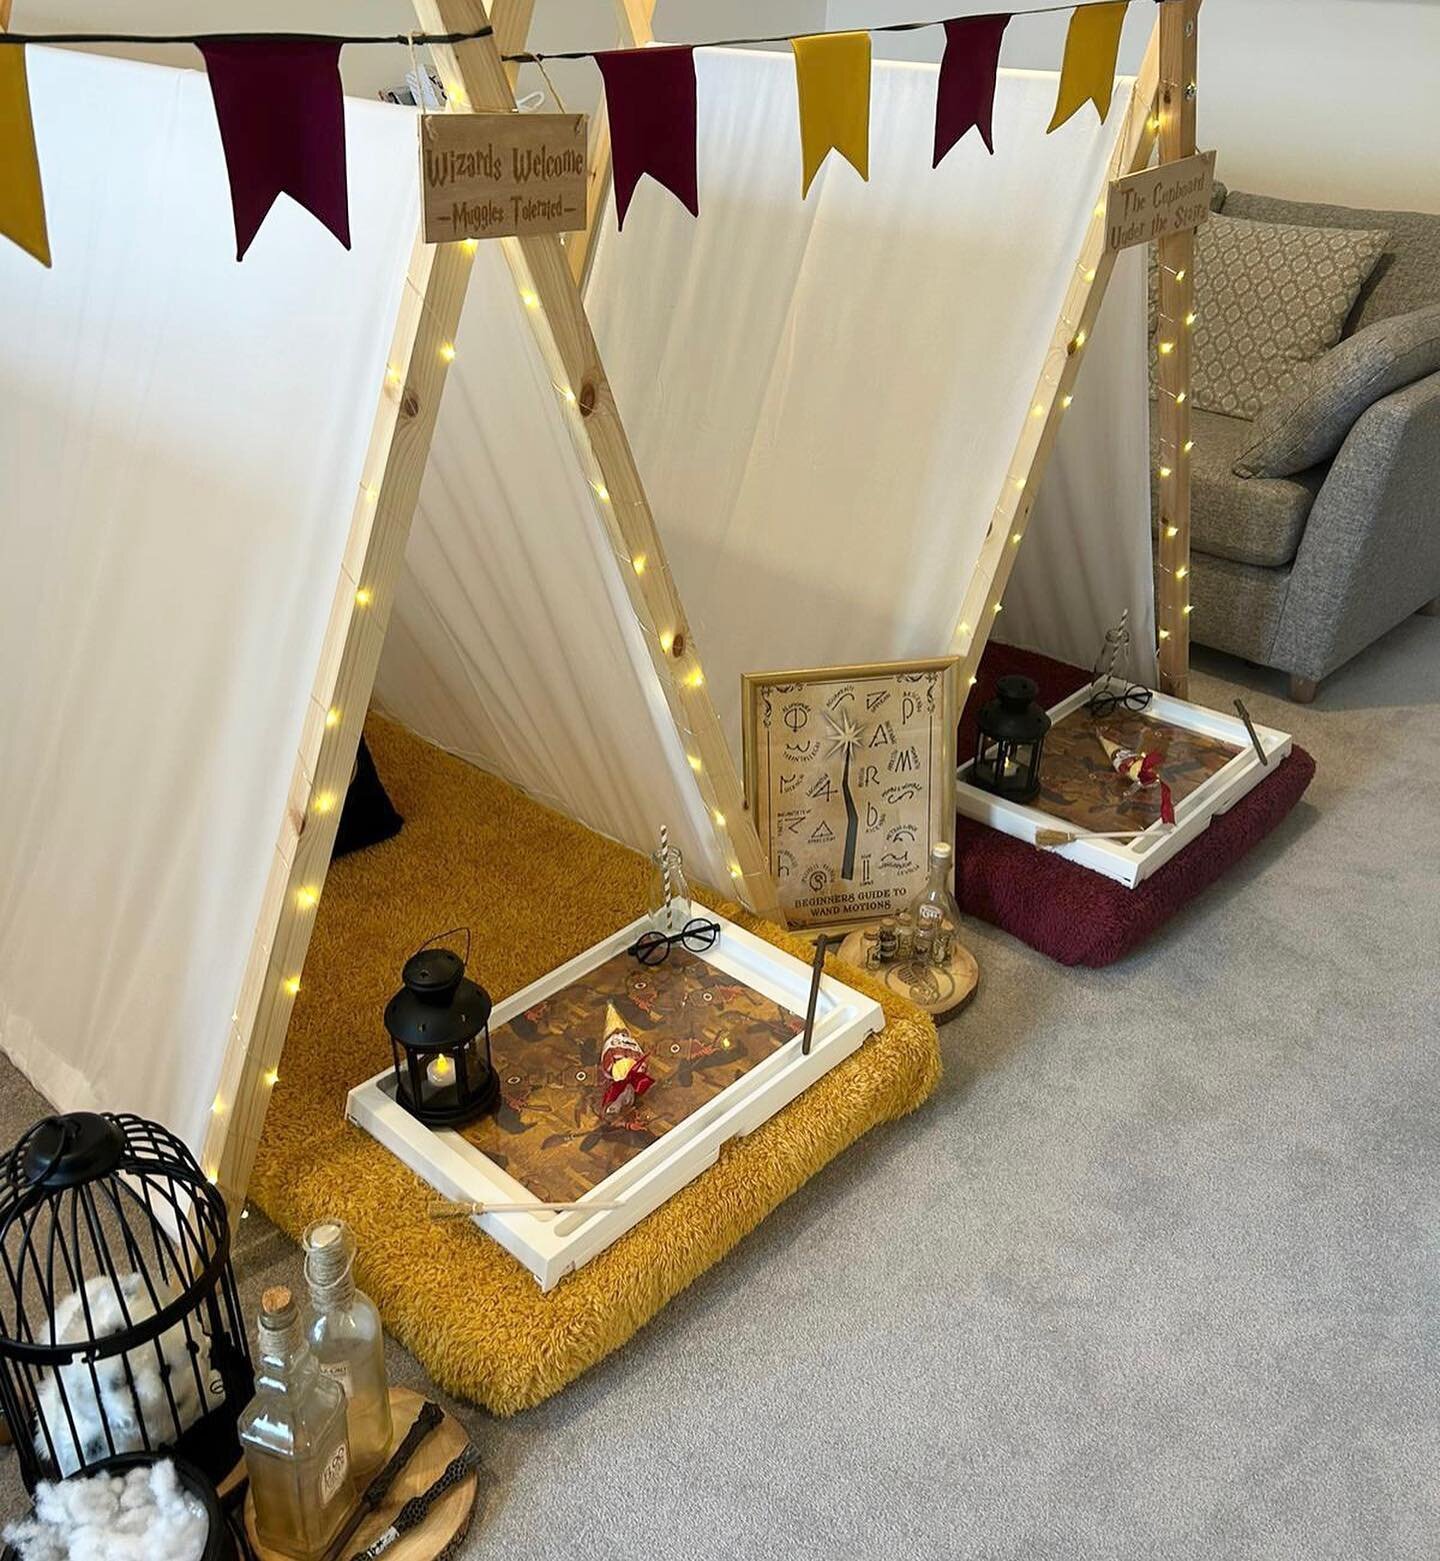 CALLING ALL WIZARDS &amp; WITCHES&hellip;
Our Gryffin-Dorm theme is so much fun! Do you have any Harry Potter fans? Why not treat them with this magical teepee set up&hellip; perfect for birthday sleepovers or simply a fun family movie night! 

#chil